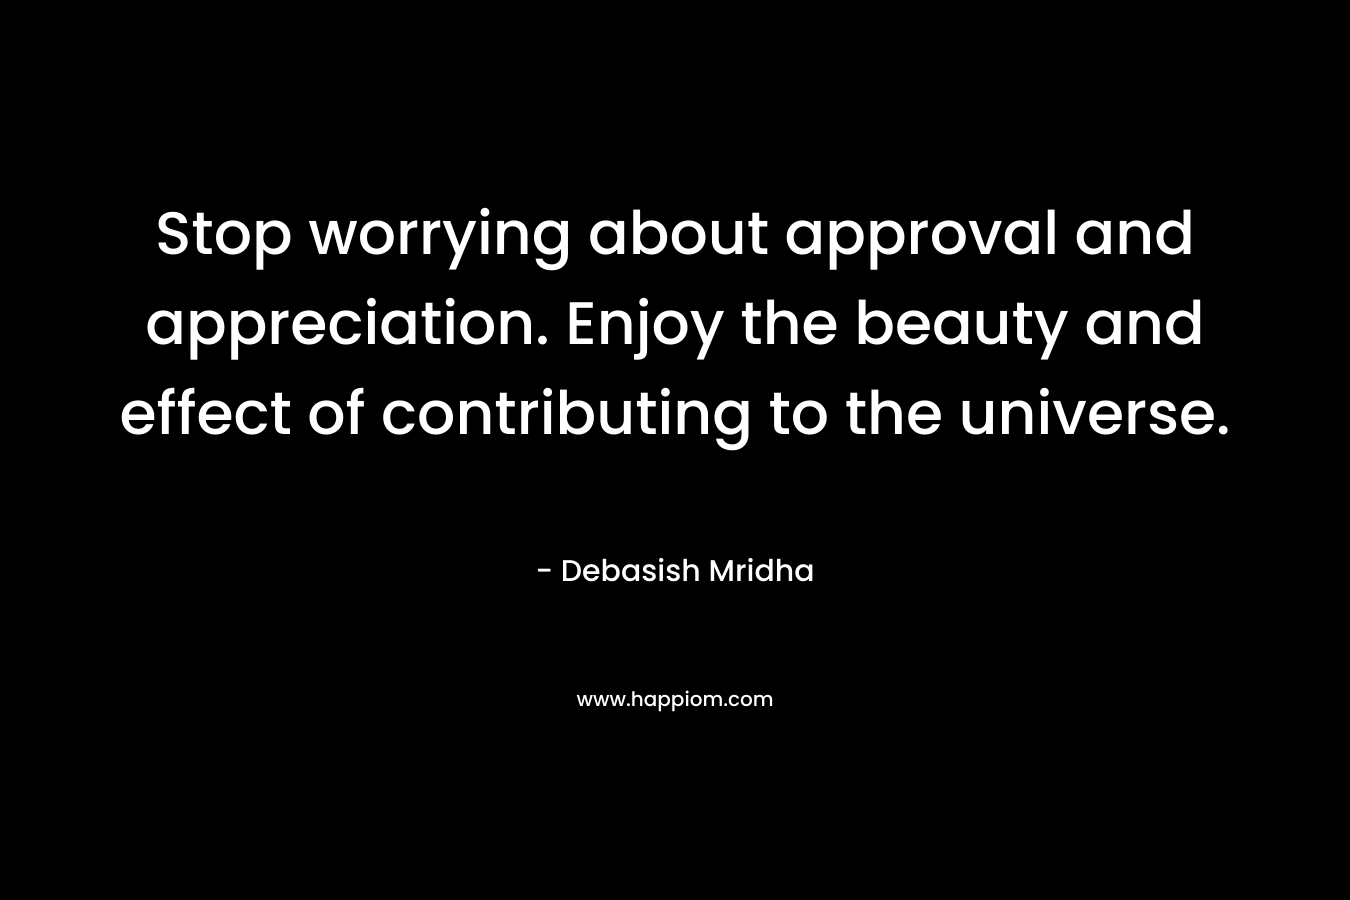 Stop worrying about approval and appreciation. Enjoy the beauty and effect of contributing to the universe.